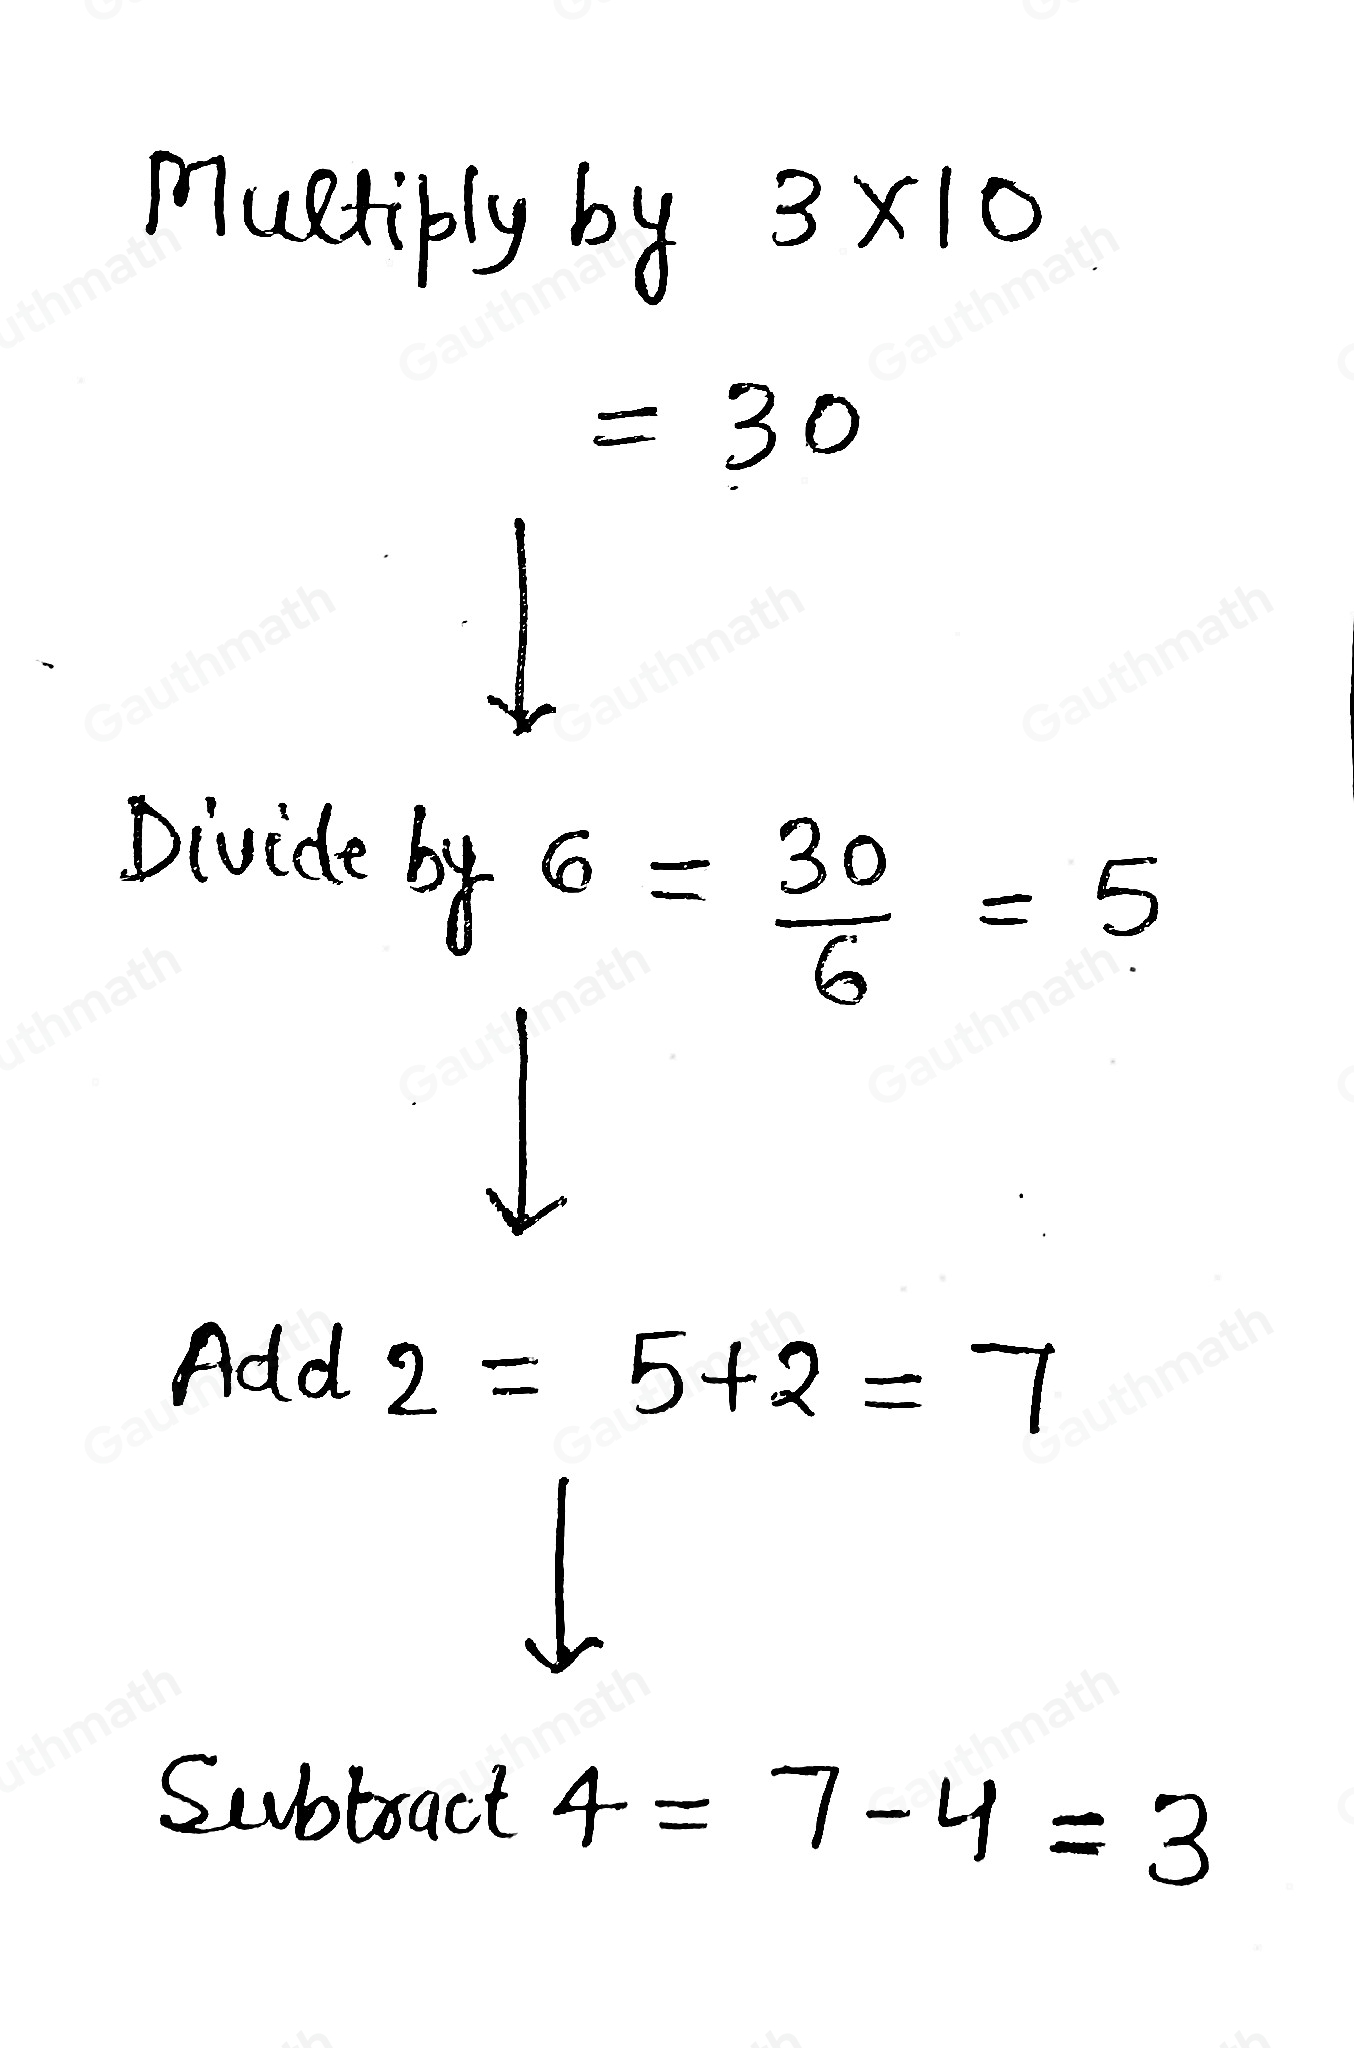 Multiply by 3 * 10 Divide by 6 Add 2 Subtract 4